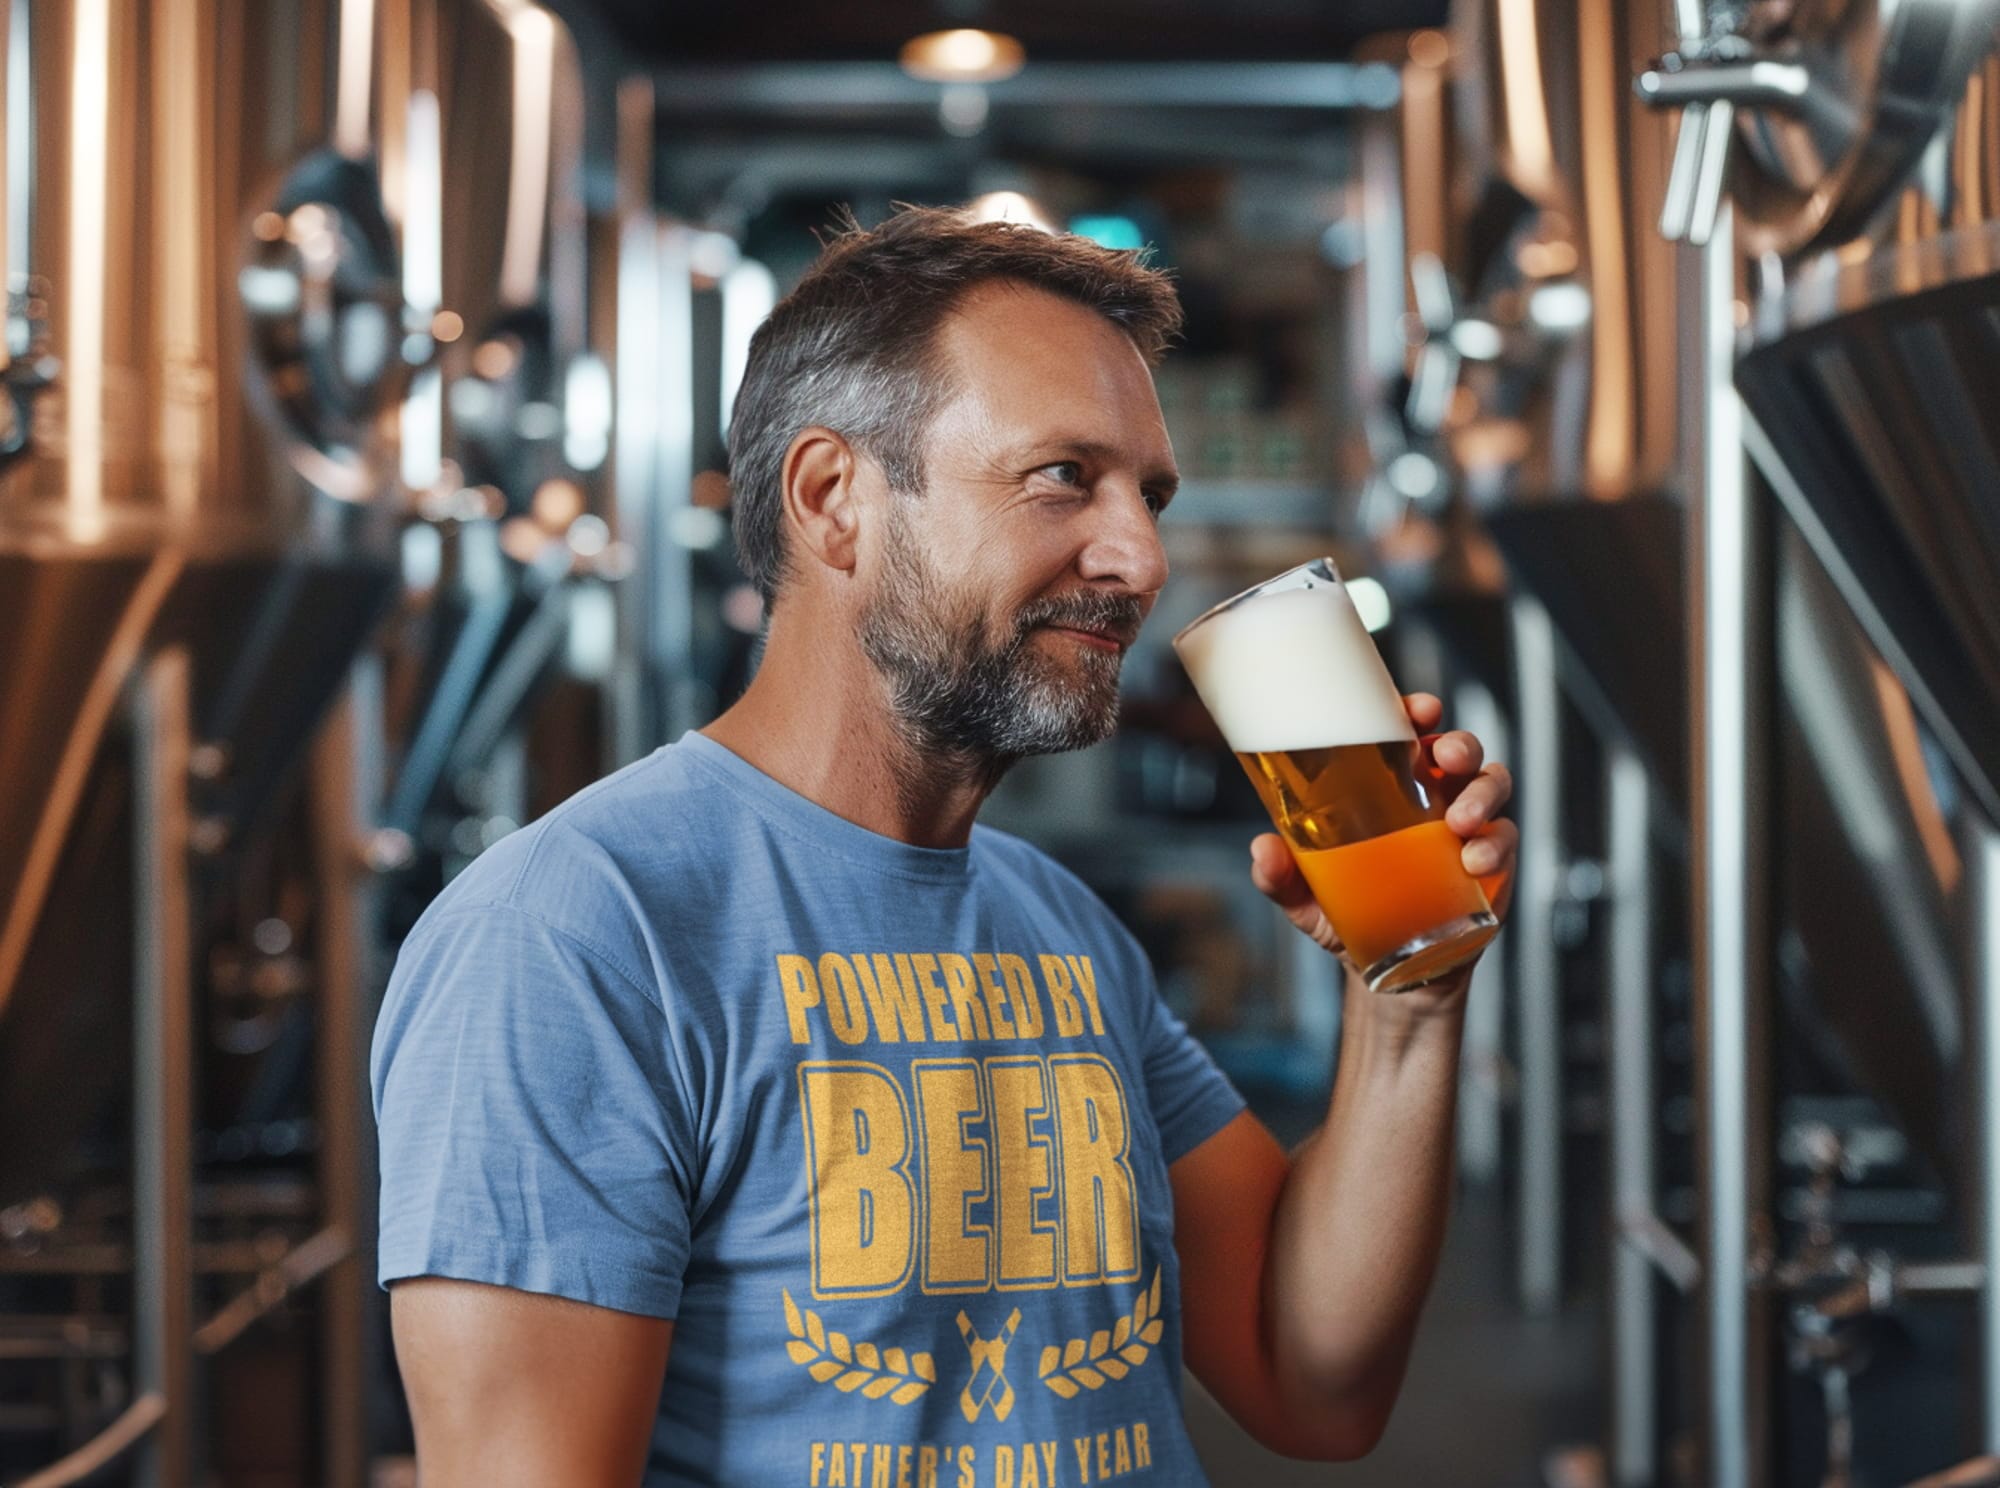 A dad enjoying his time visiting a brewery and drinking beer. His shirt says "Powered by Beer. Father's Day Year"